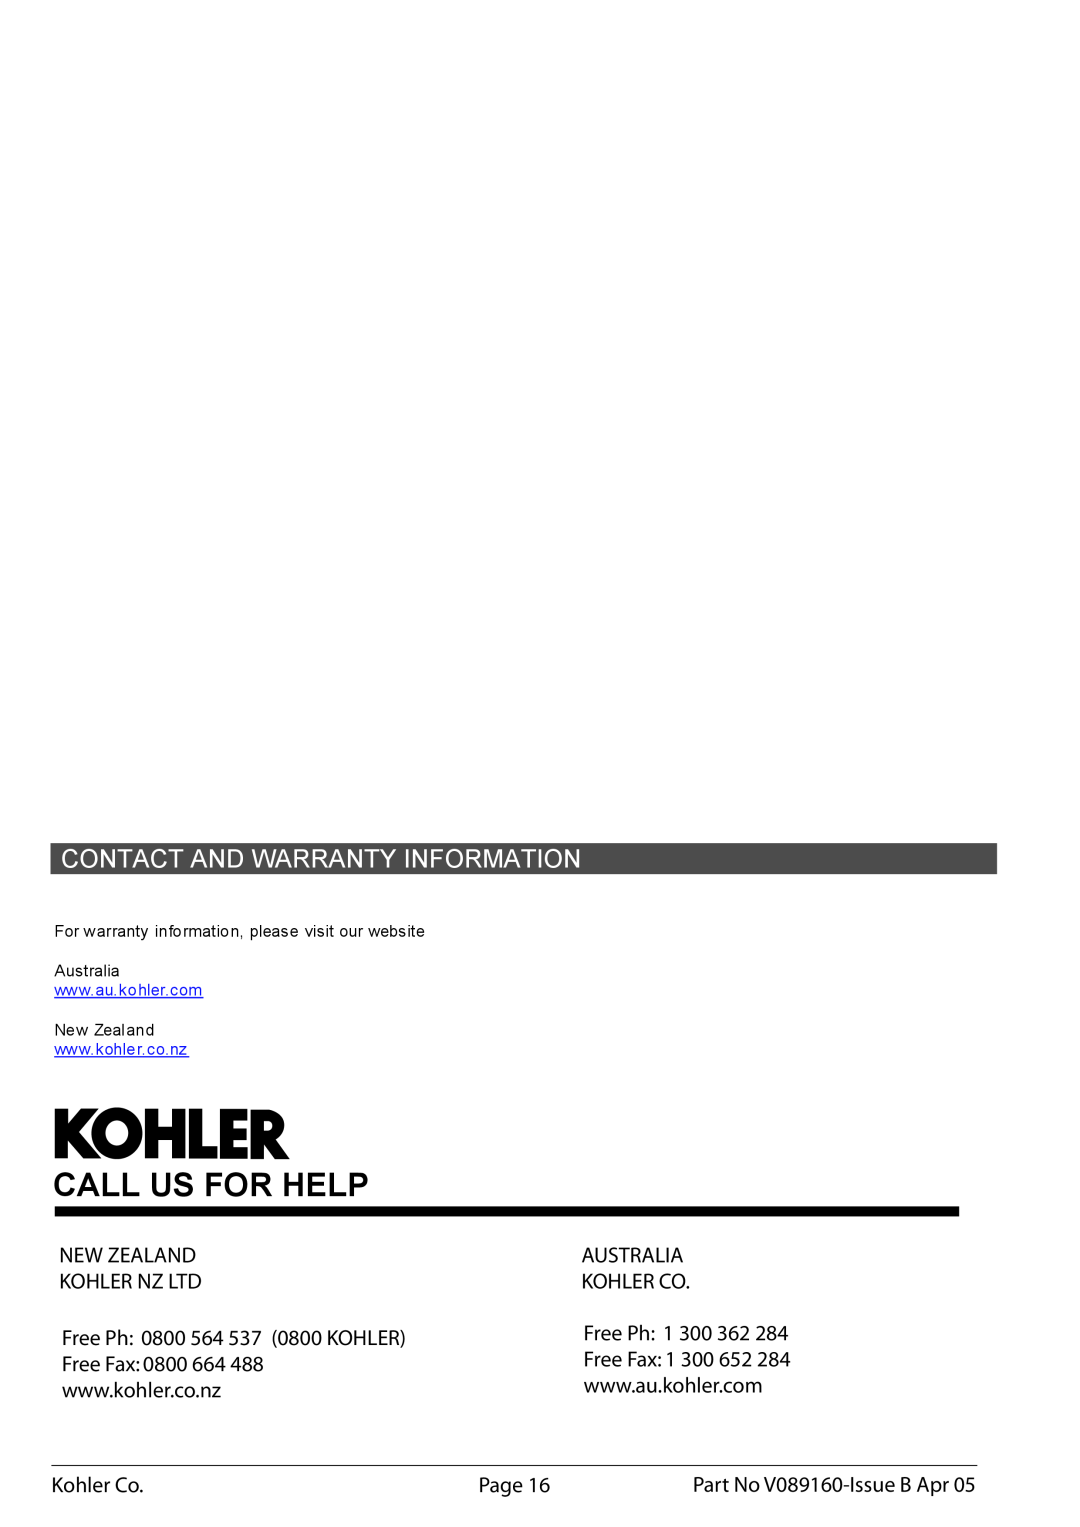 Kohler Call Us For Help, Contact And Warranty Information, Part No V089160-IssueB Apr, Australia, New Zealand 